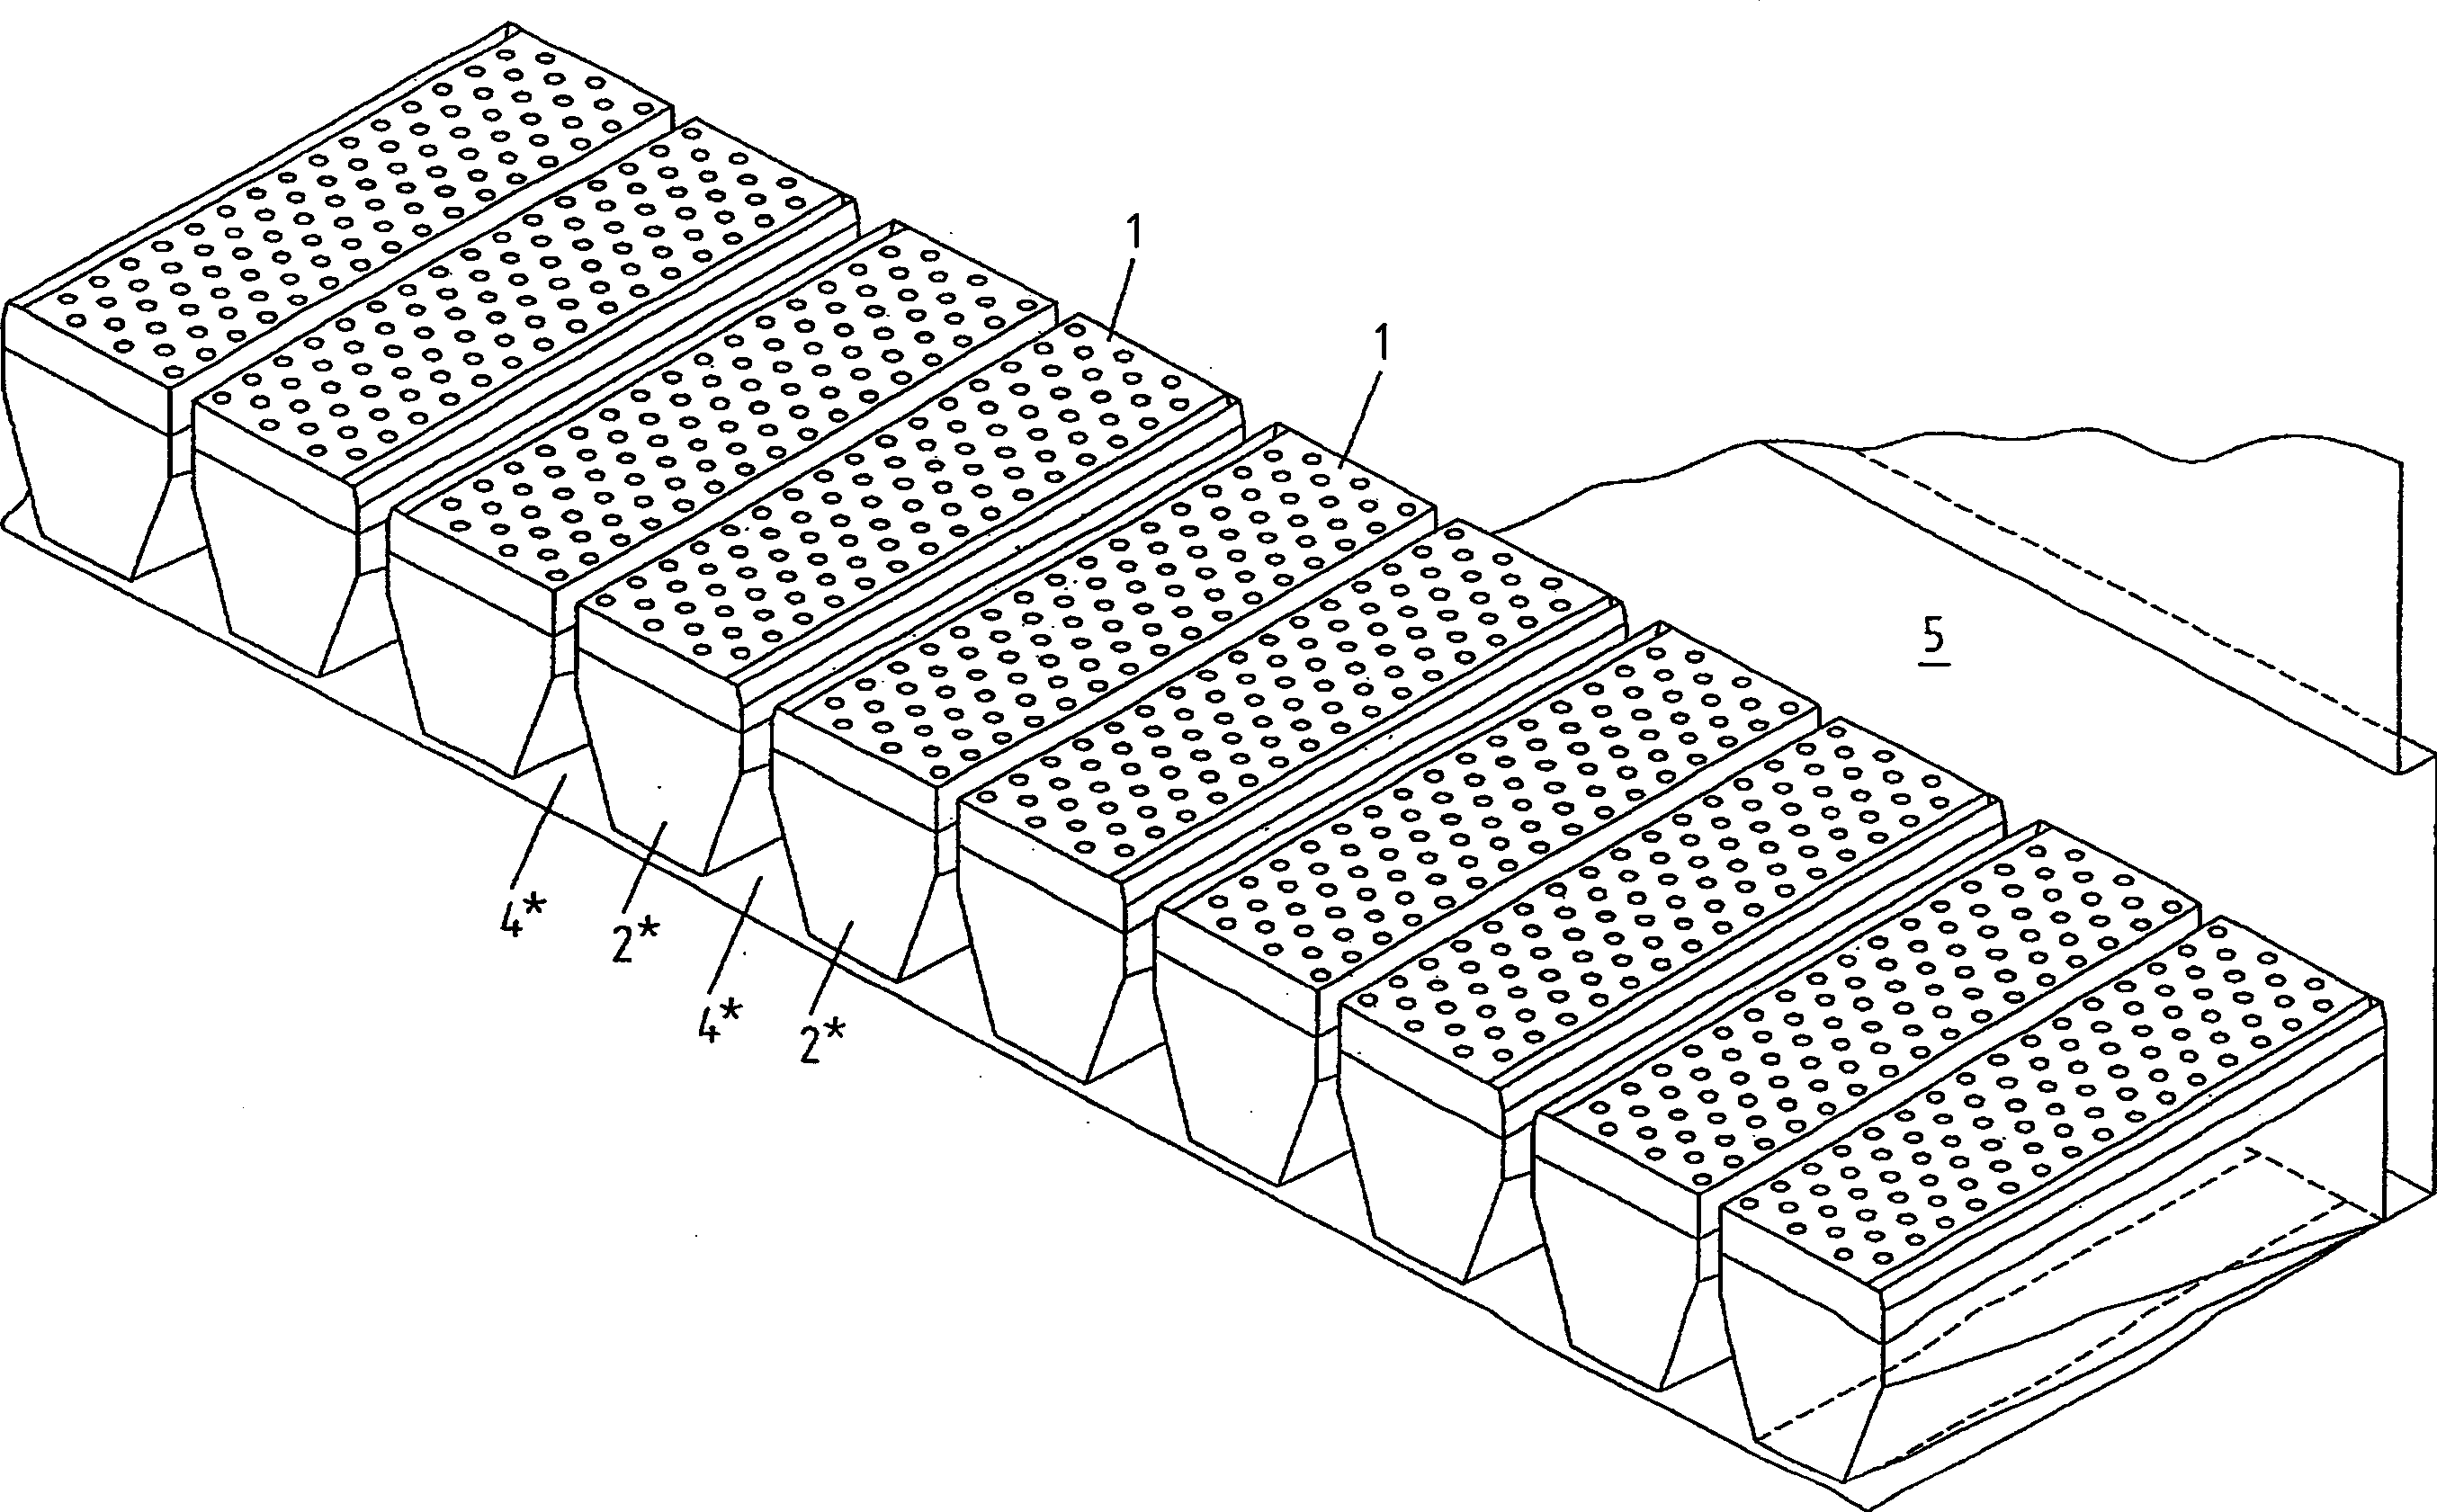 Nozzle system for processing netted material